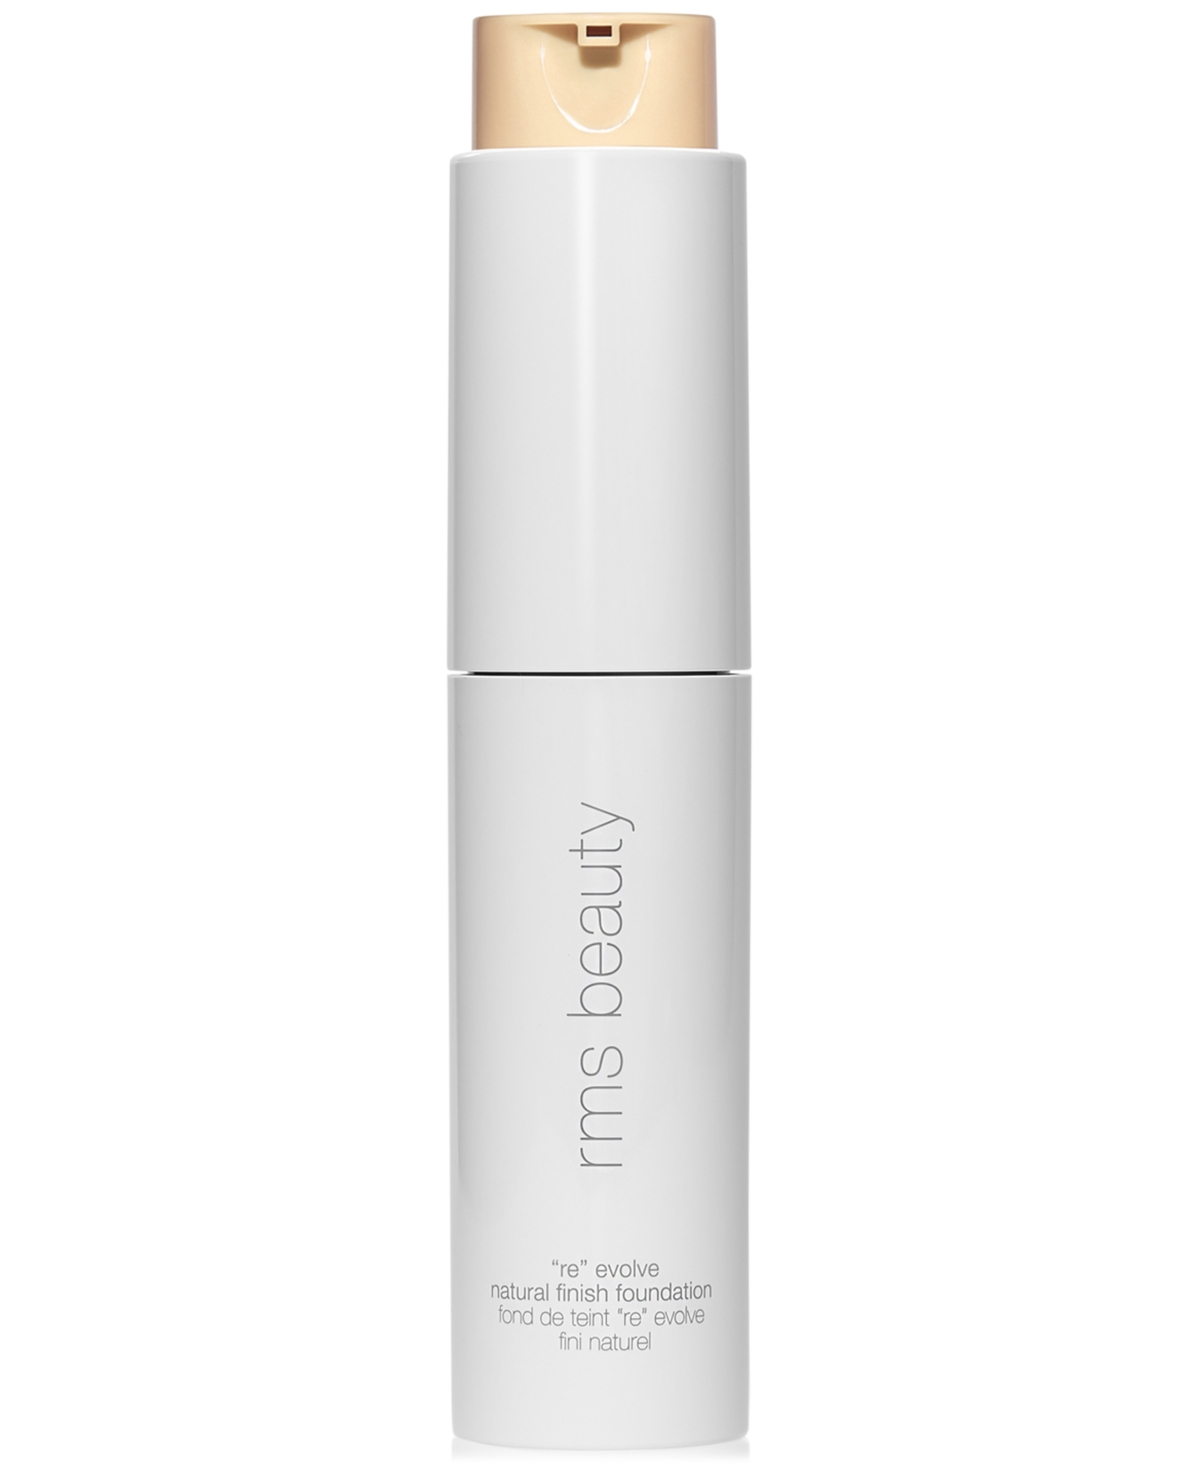 Rms Beauty Reevolve Natural Finish Foundation In Lightest Alabaster